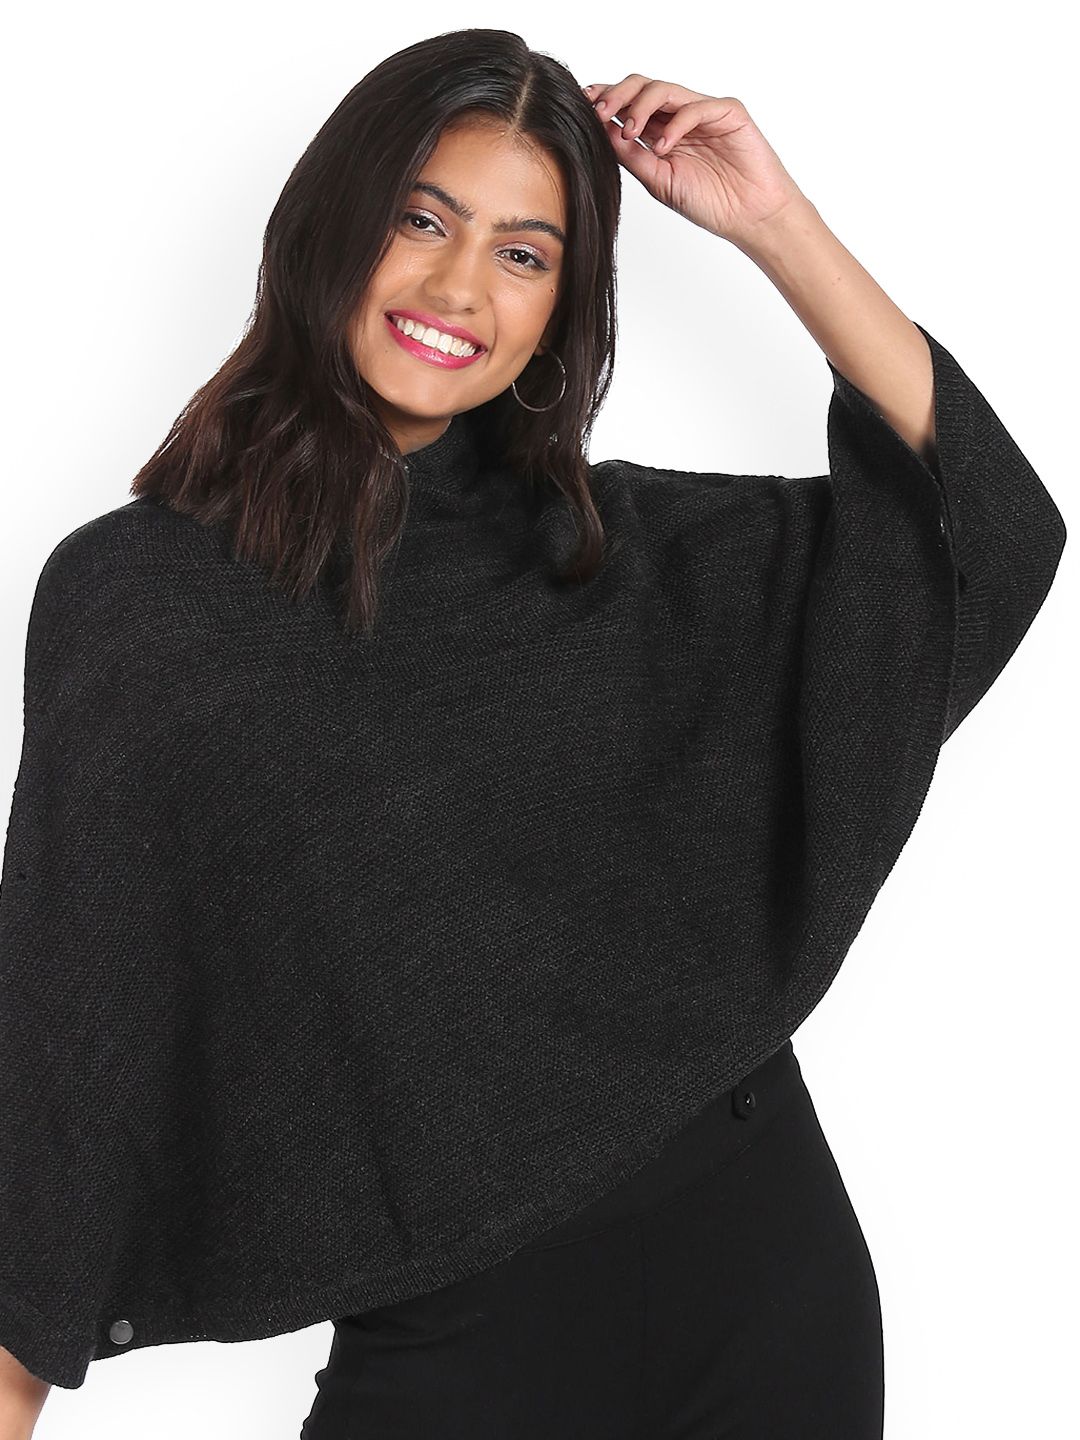 Sugr Women Charcoal Hooded Patterned Weave Sweater Price in India